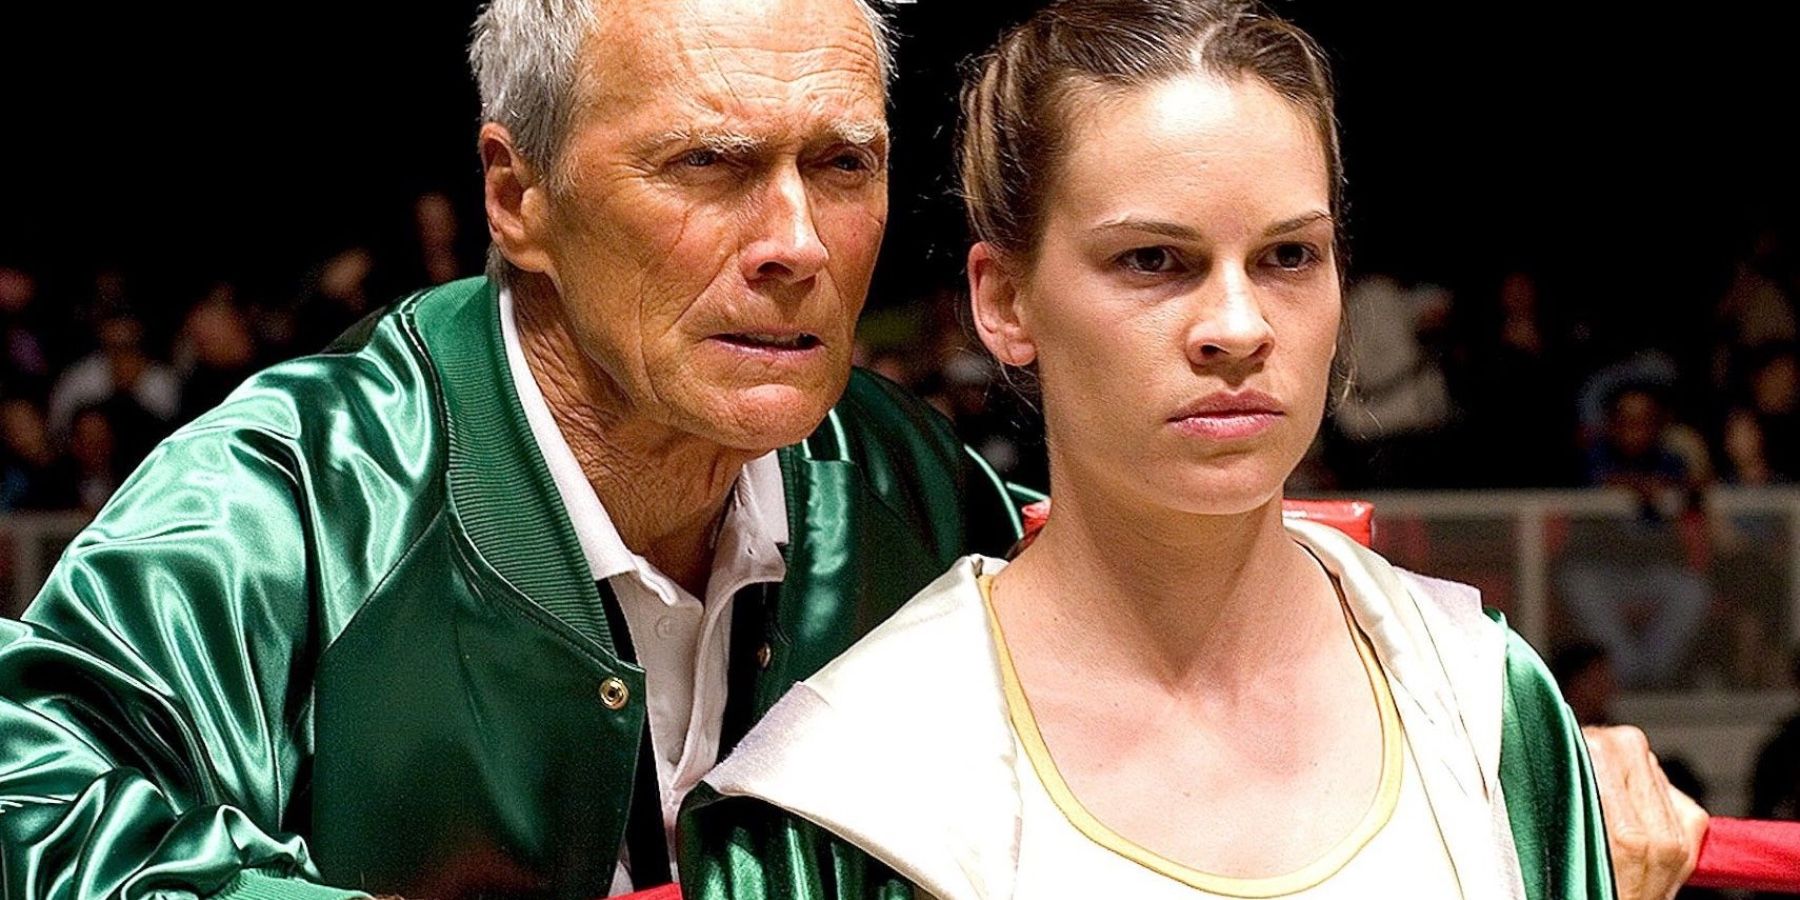 Clint-Eastwood-and-Hilary-Swank-in-Million-Dollar-Baby